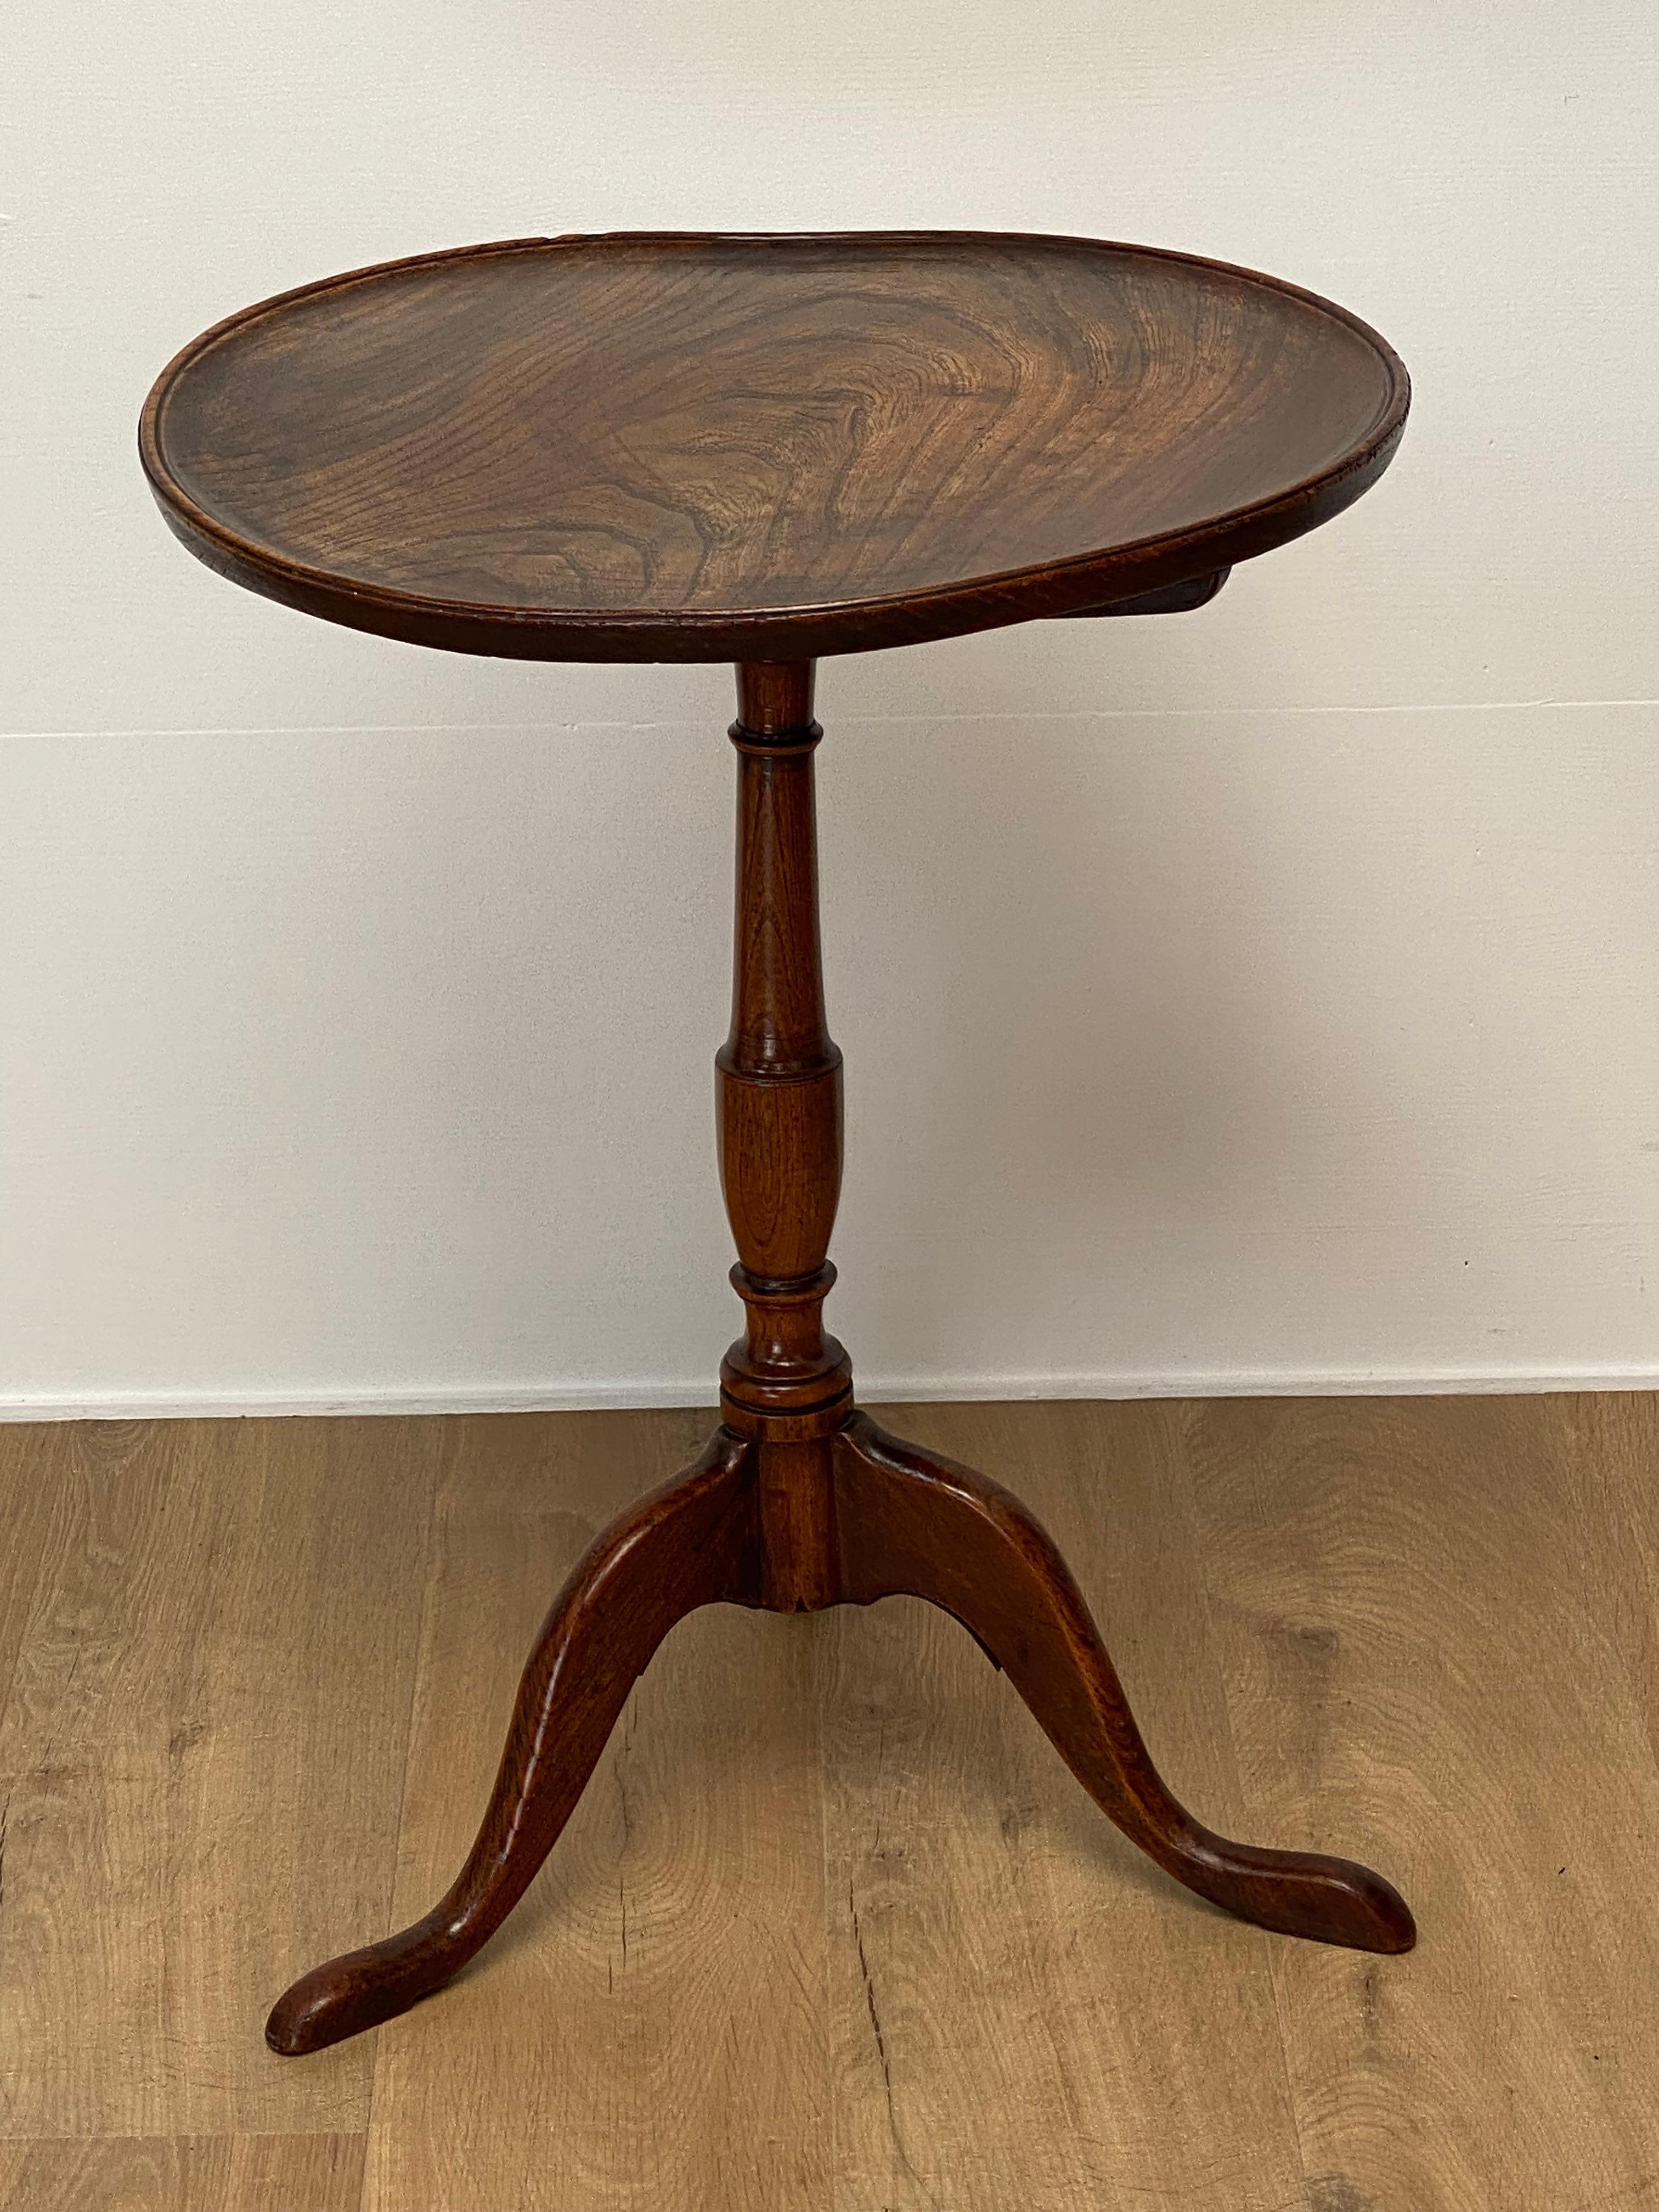 Antique , English unusual Elm Tripod Table,
18 Century, the top of the table is waving due to age,
great and warm, old patina of the Elm wood,
small table with a lot of caracter